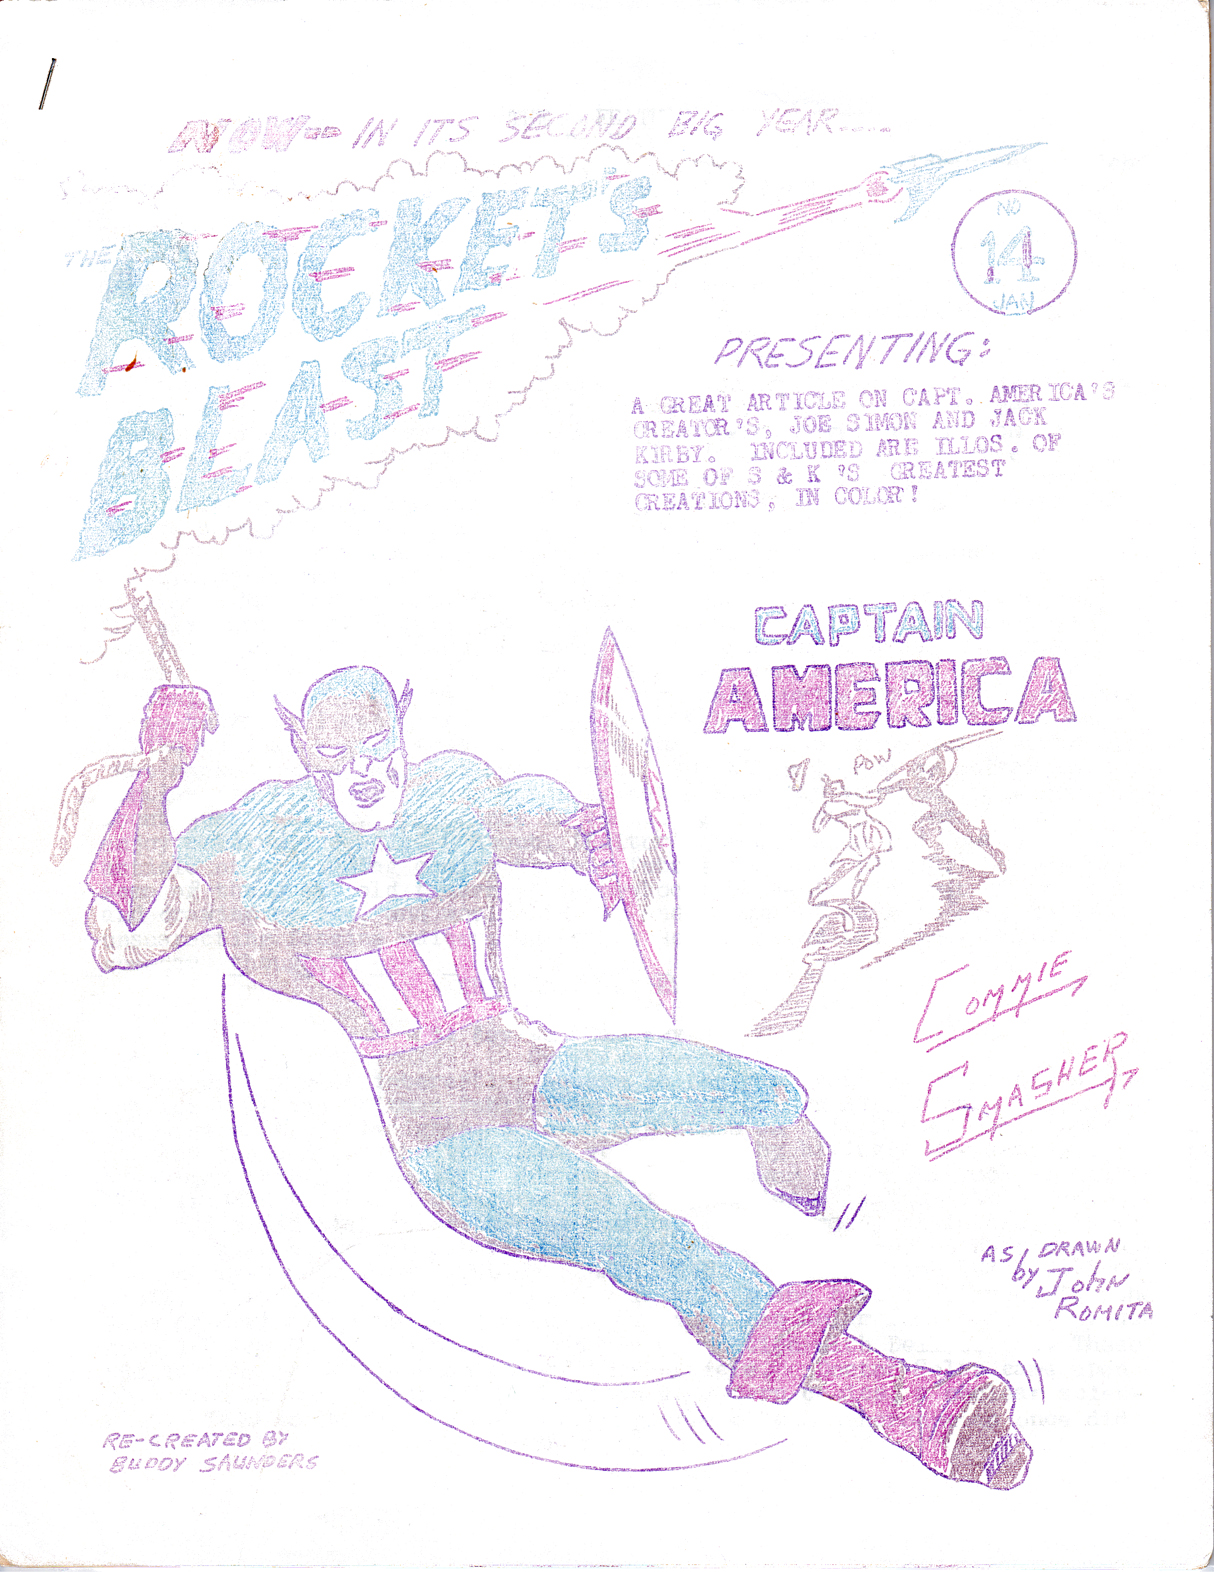 Rocket's Blast #14 with cover by Buddy Saunders